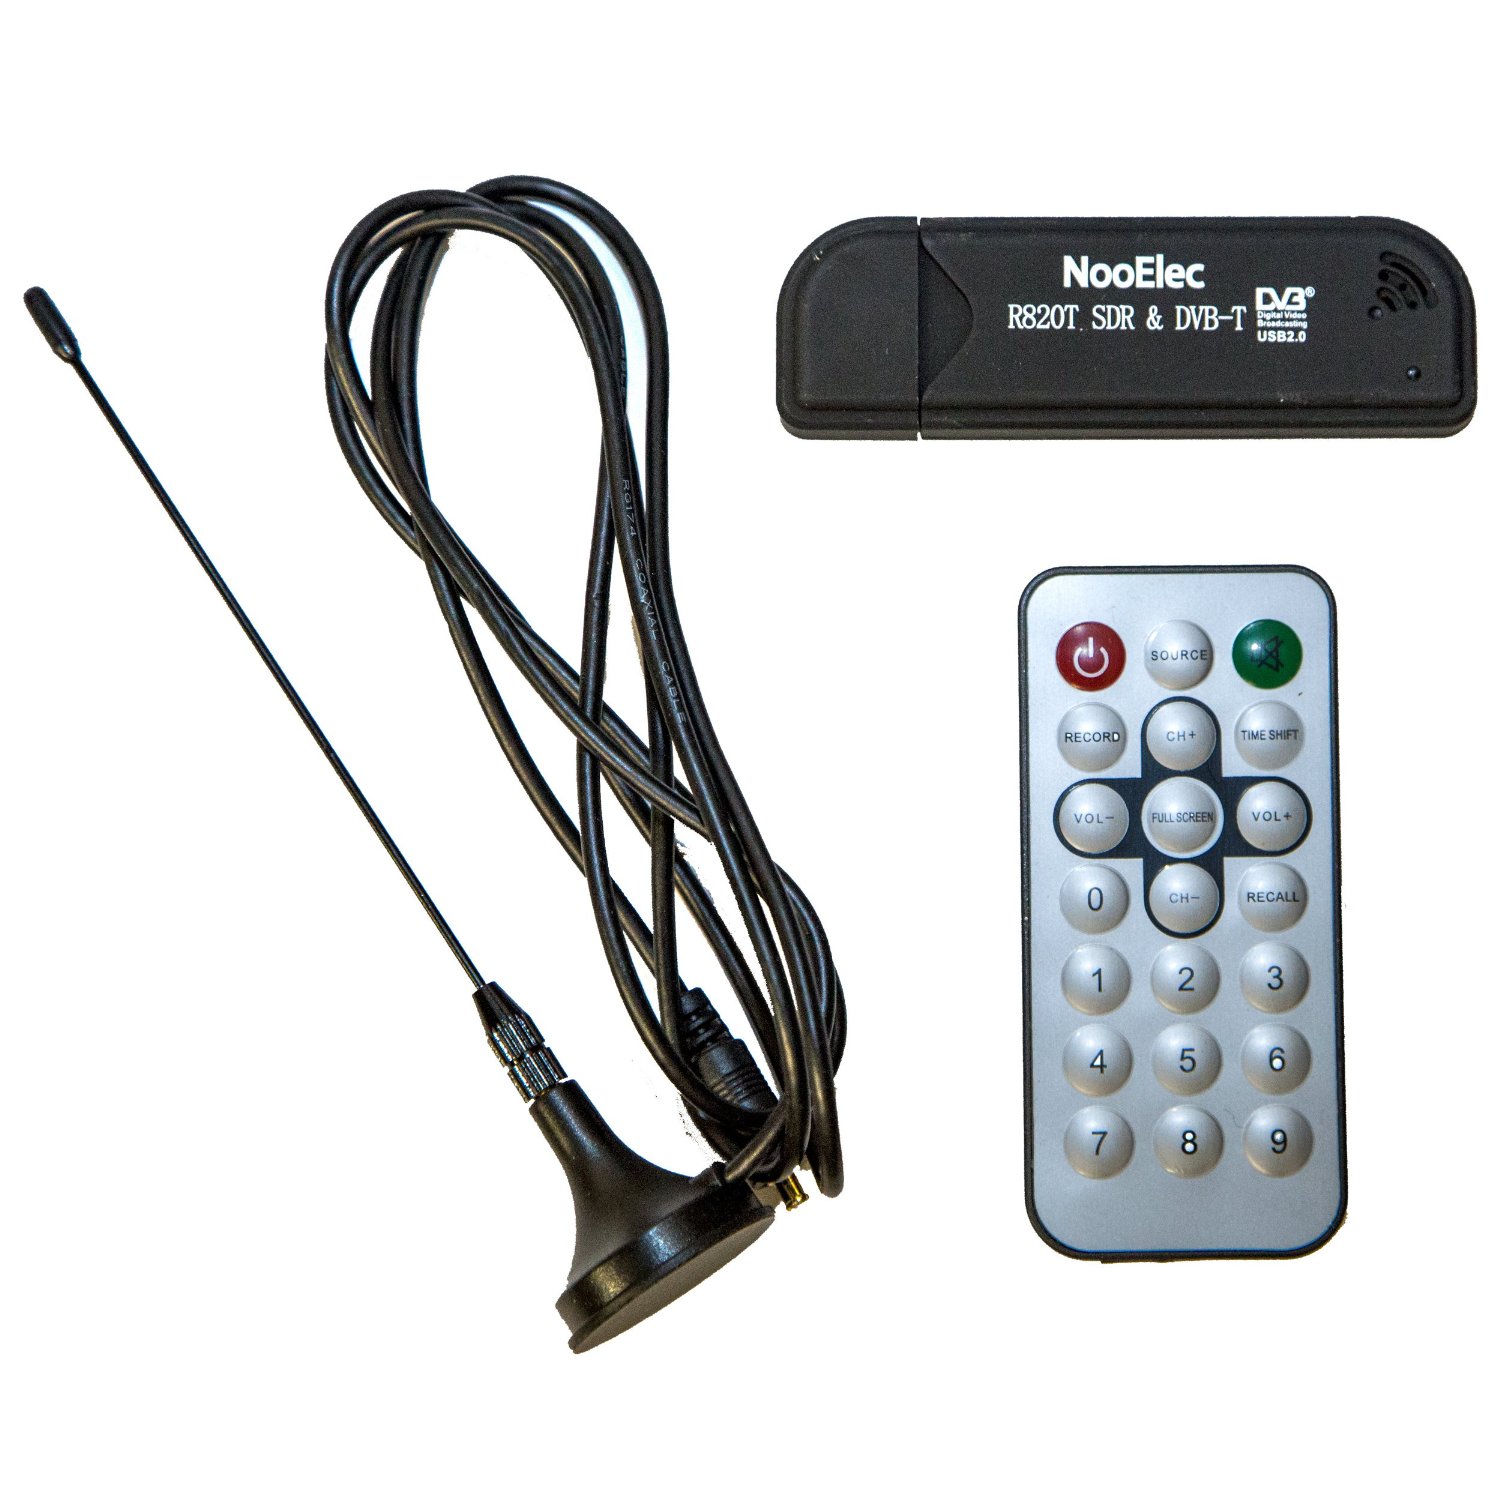 Sdr Radio Dongle Receiver Software